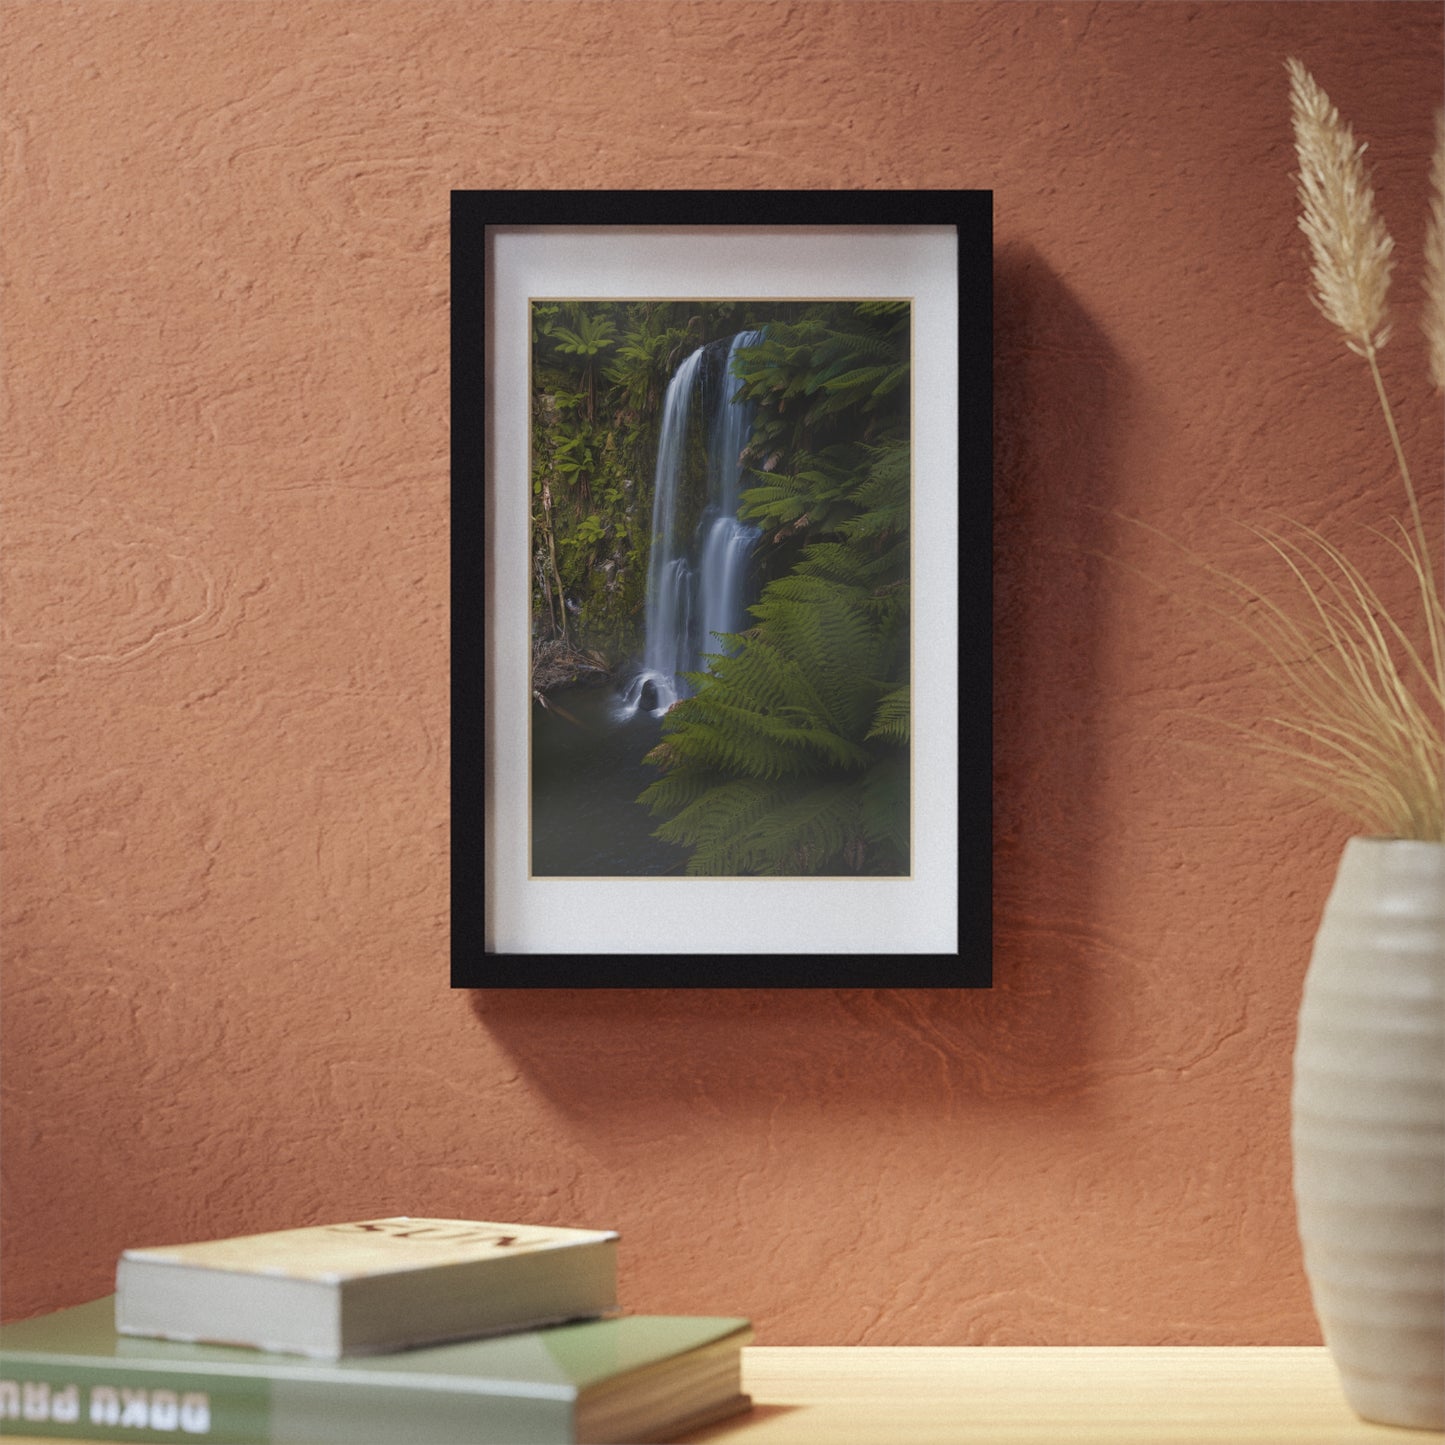 The beautiful Beauchamp Falls printed on a black framed poster